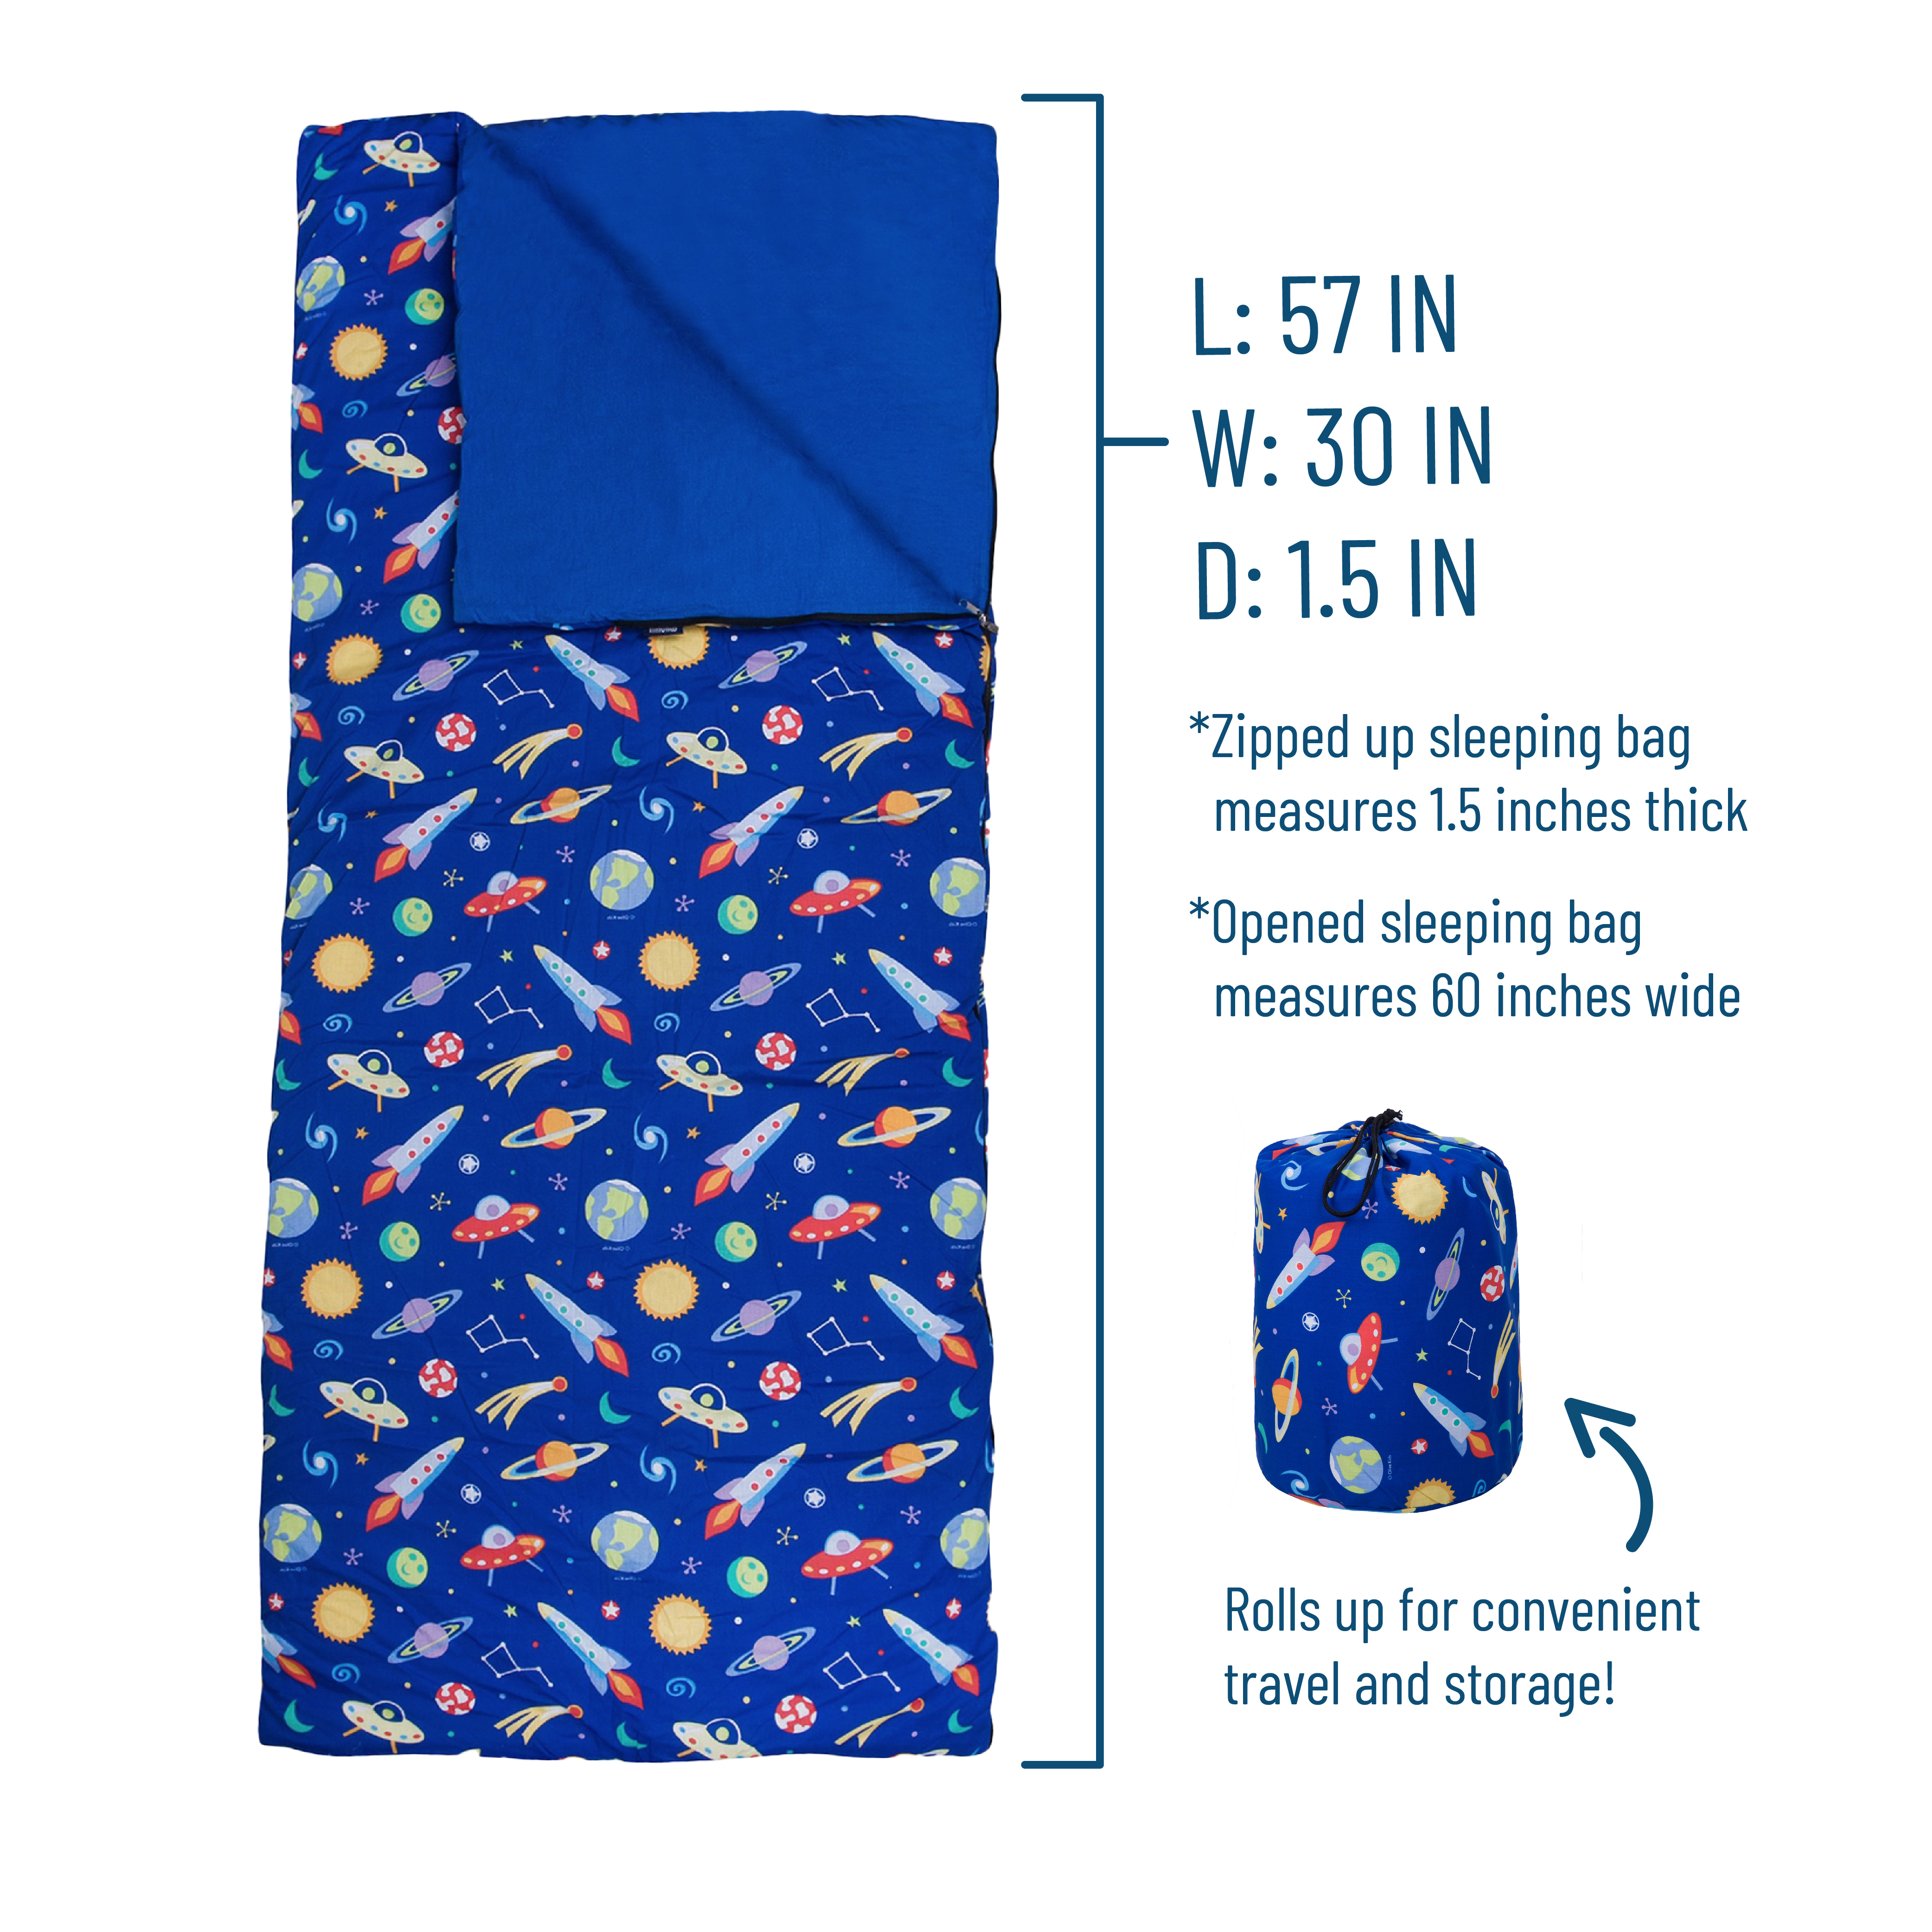 Out of this World Original Sleeping Bag - image 5 of 8